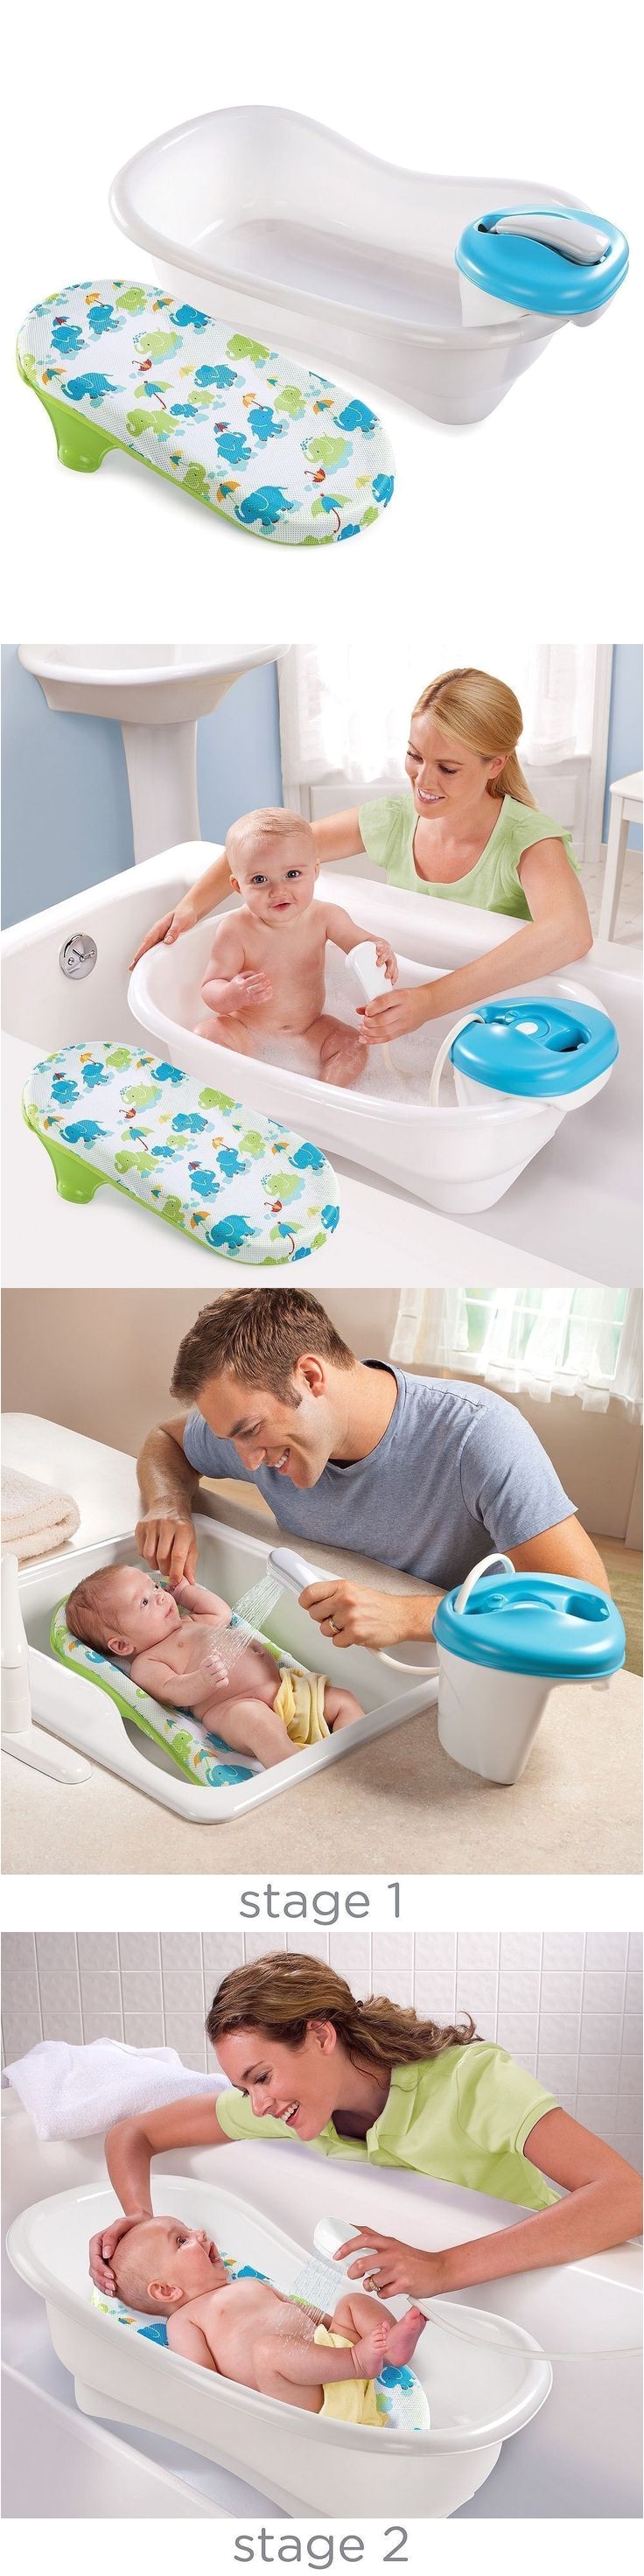 bath tubs summer infant newborn to toddler bath center and shower baby tub all